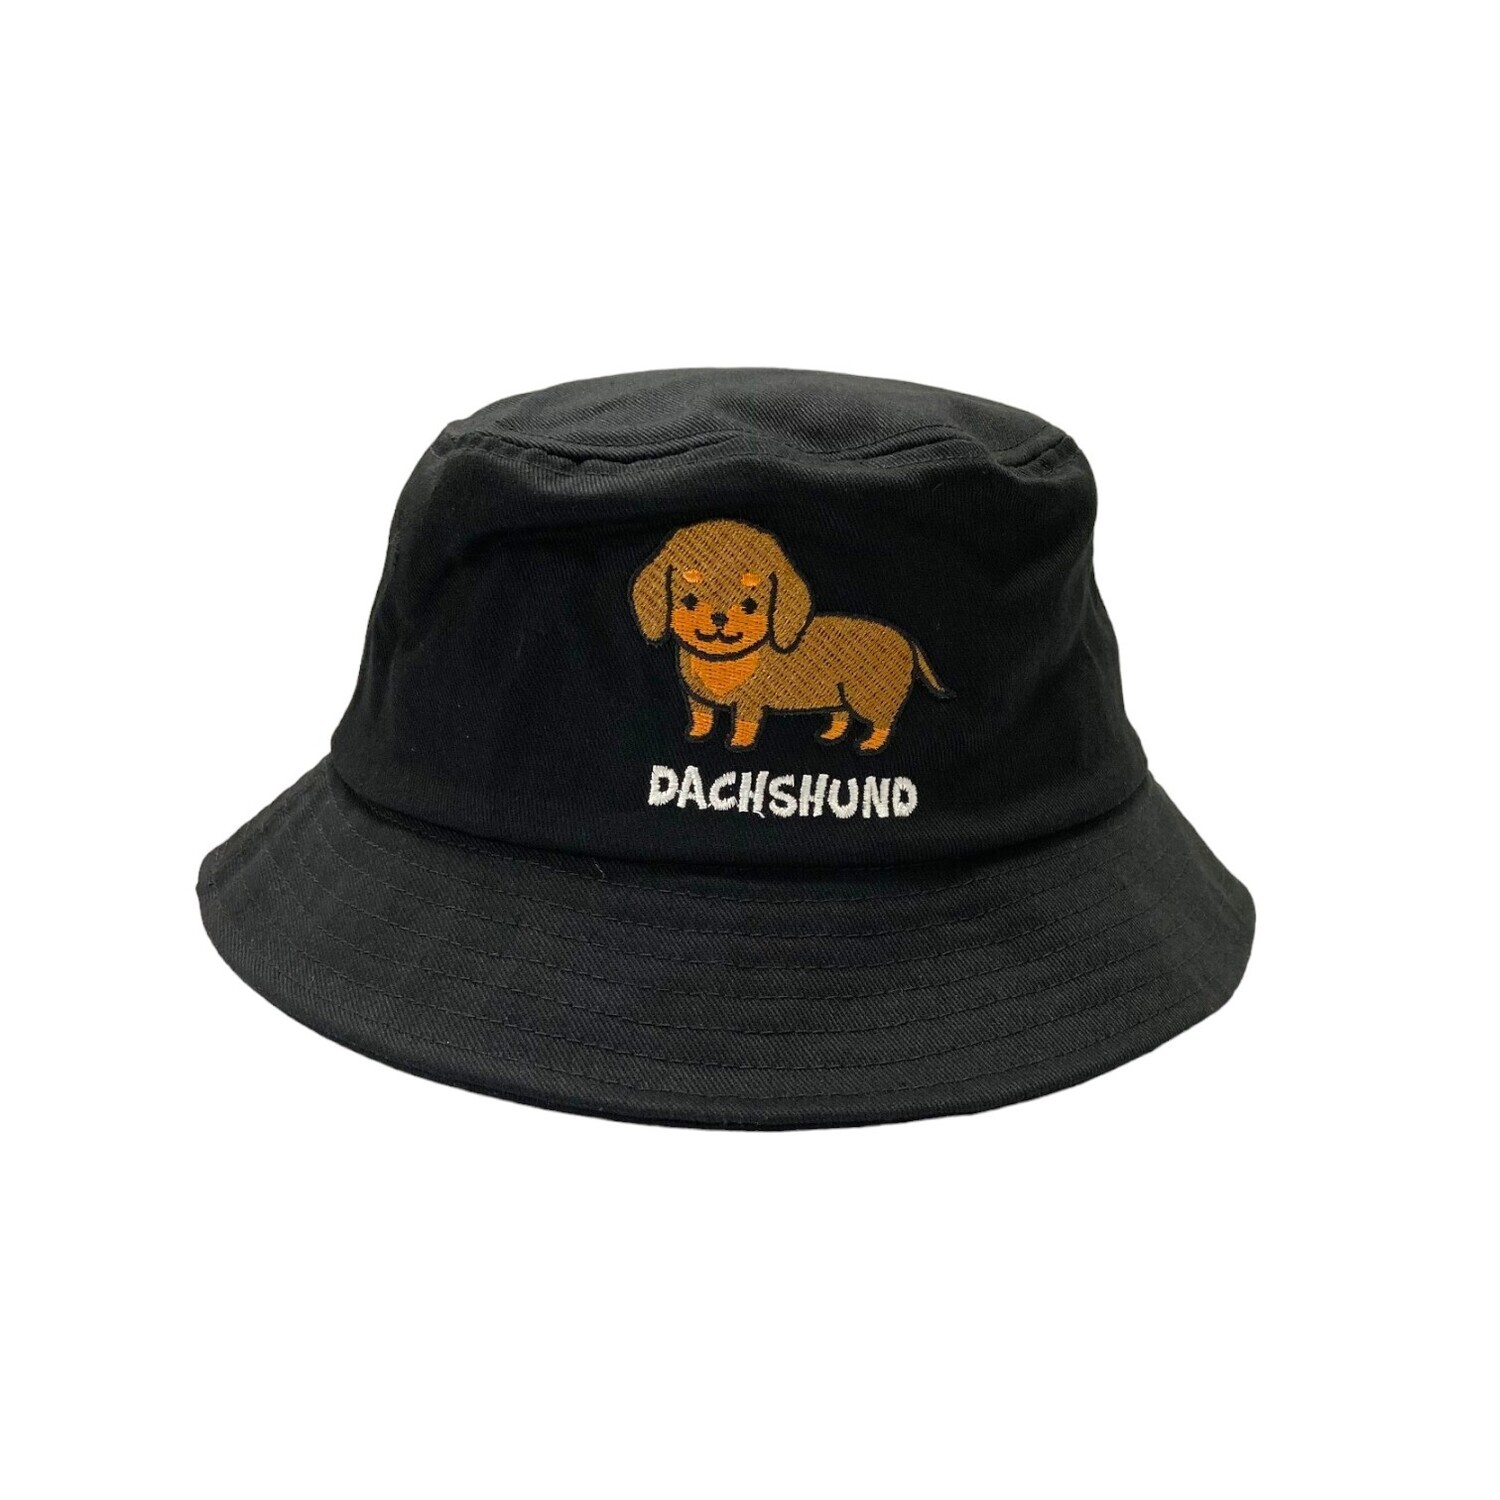 Dachshund Embroidery Bucket Hat, Color: Black, Size: Free Size (56-58cm)